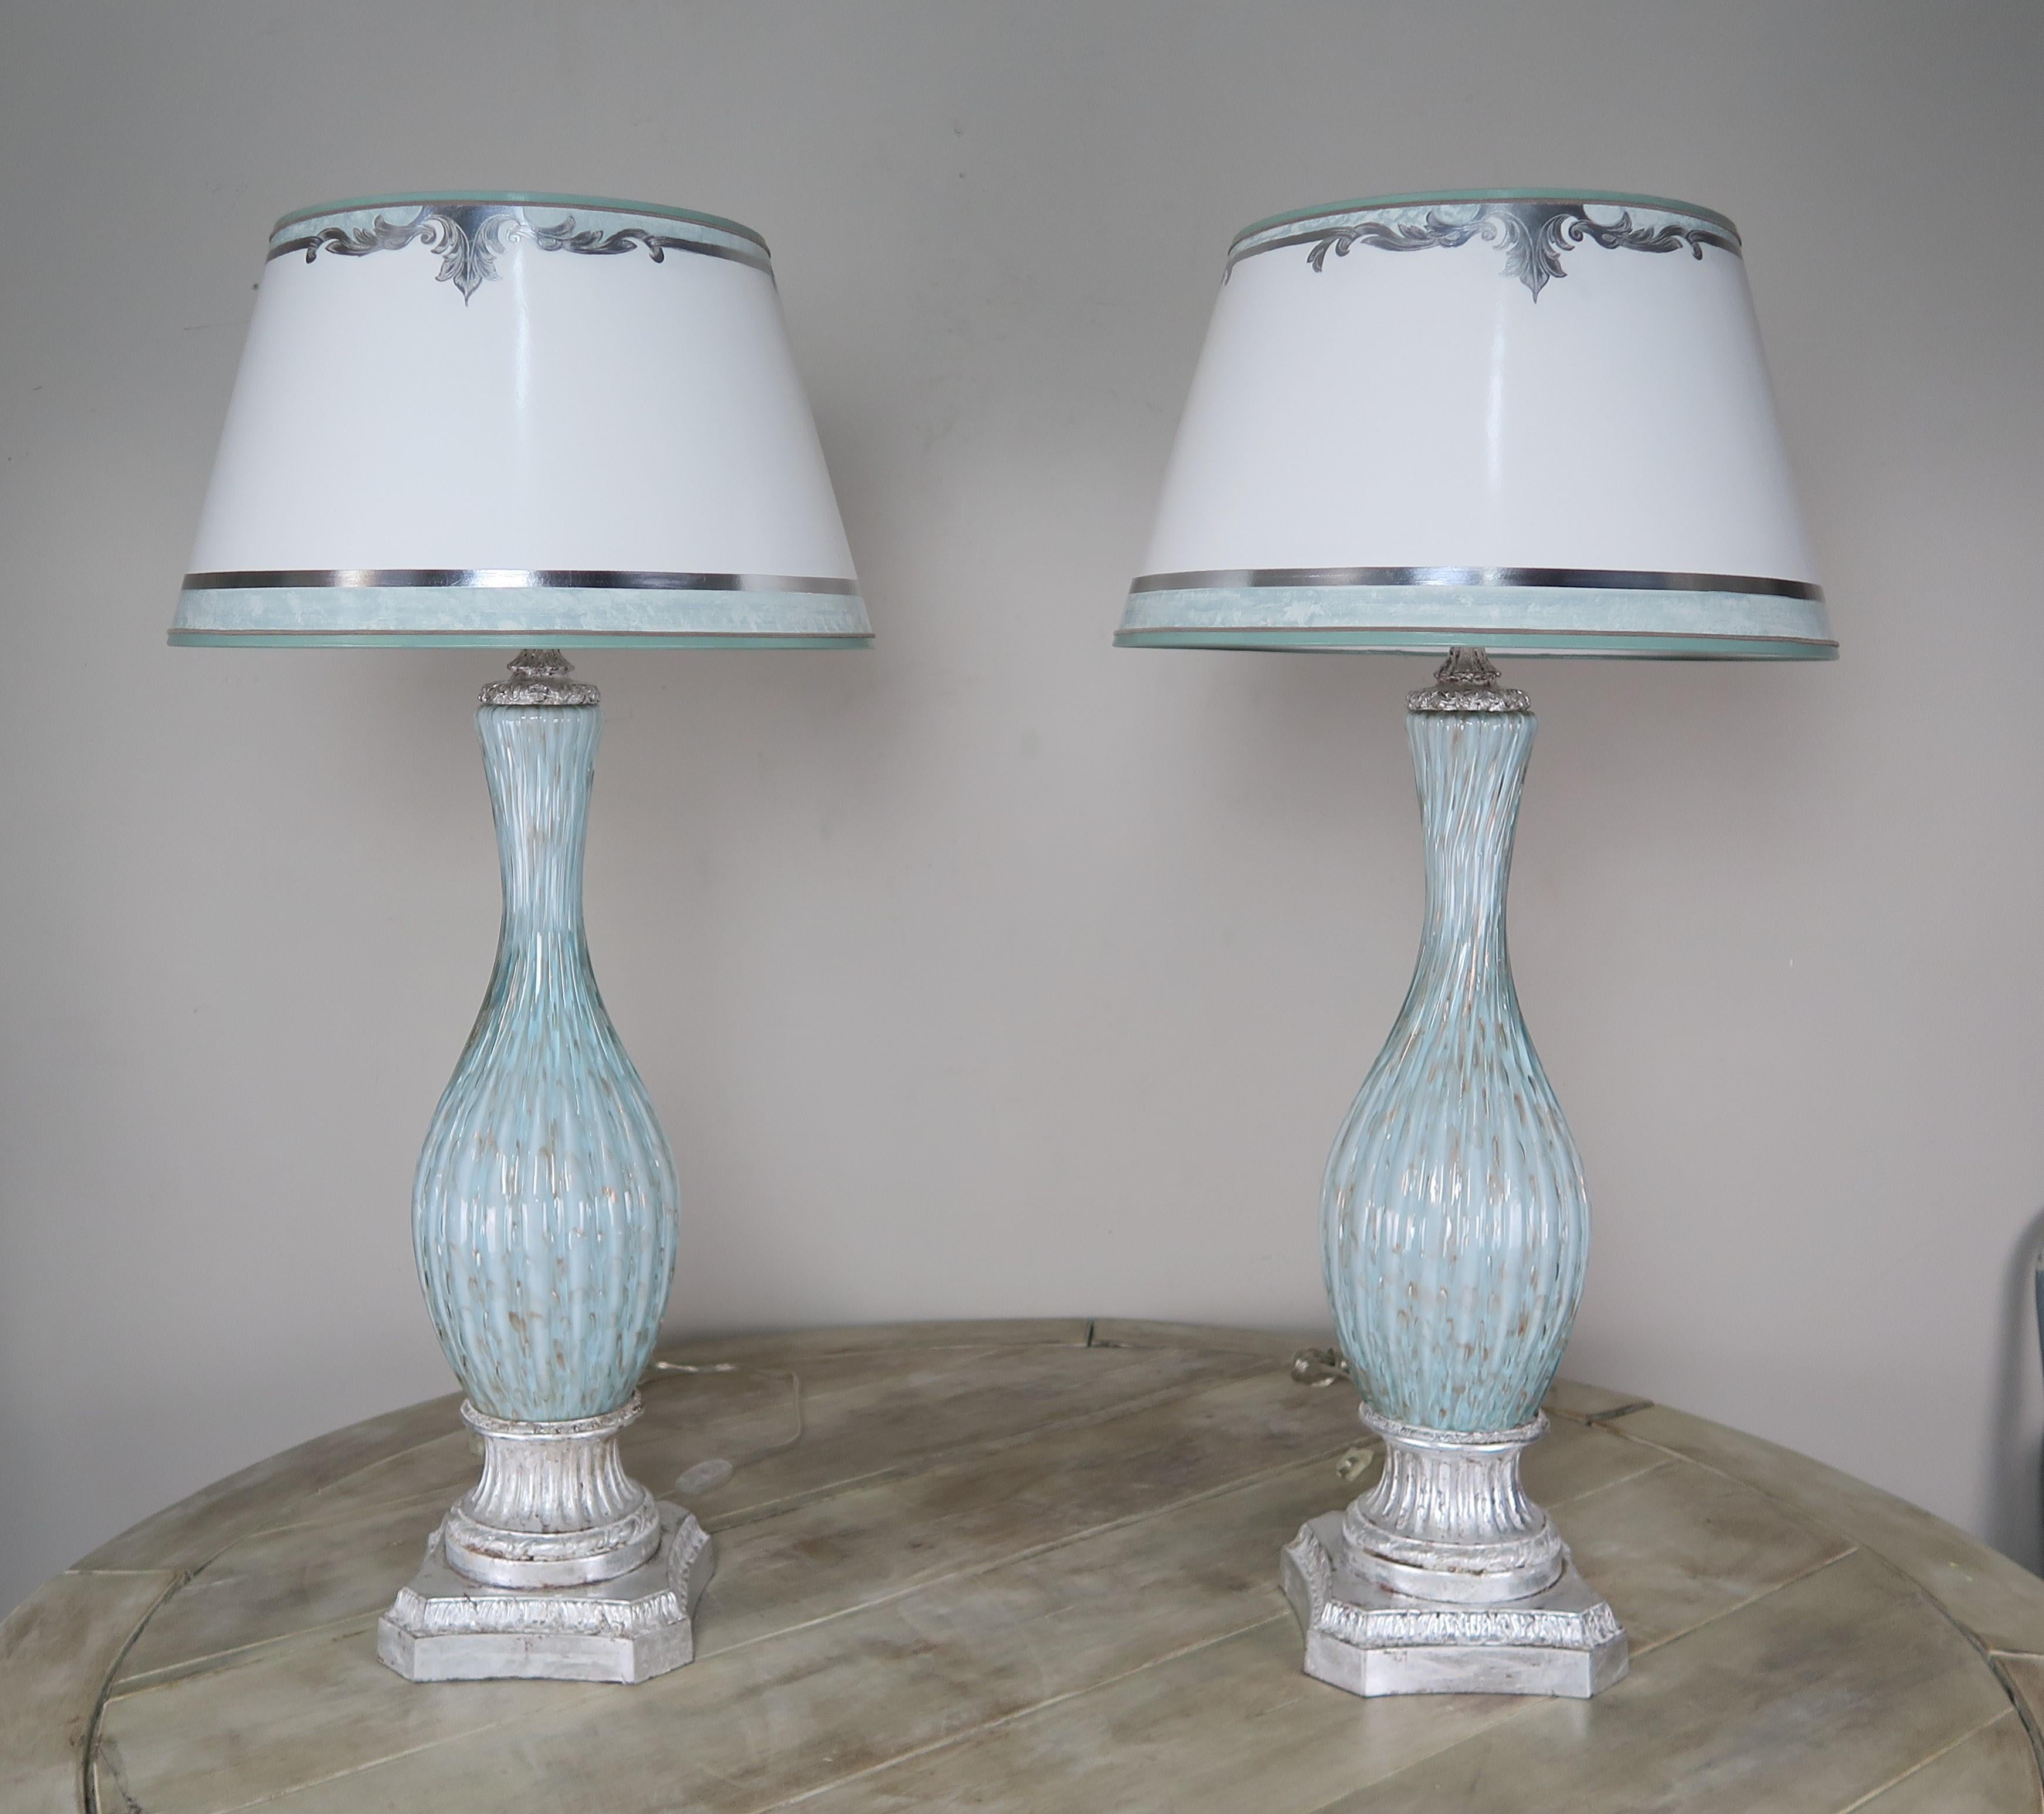 Pair of rare aquamarine colored handblown Italian Murano Lamps on silvered bases. The lamps are crowned with hand painted parchment shades with coordinating aquamarine and silver detailing.